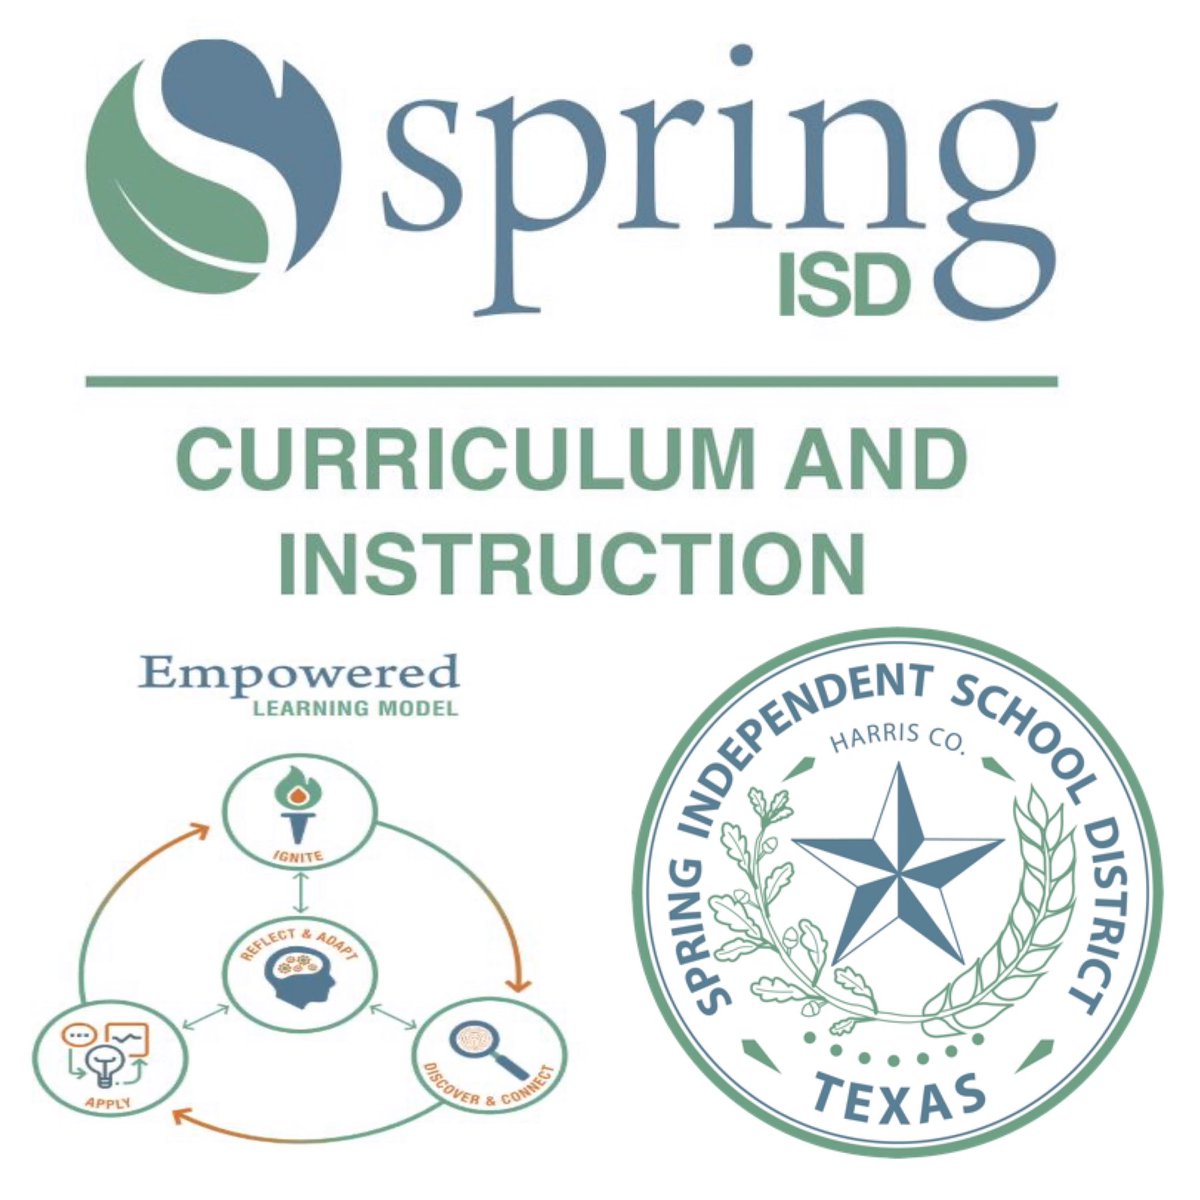 So excited to serve as the new Director of Elementary for @SpringISD_Curr and such an amazing team! Can’t wait to see what the future brings for our team, our department, and our district! #empoweredlearning #hybridlearning #learningforall #teamwork #teamelementary @SpringISD